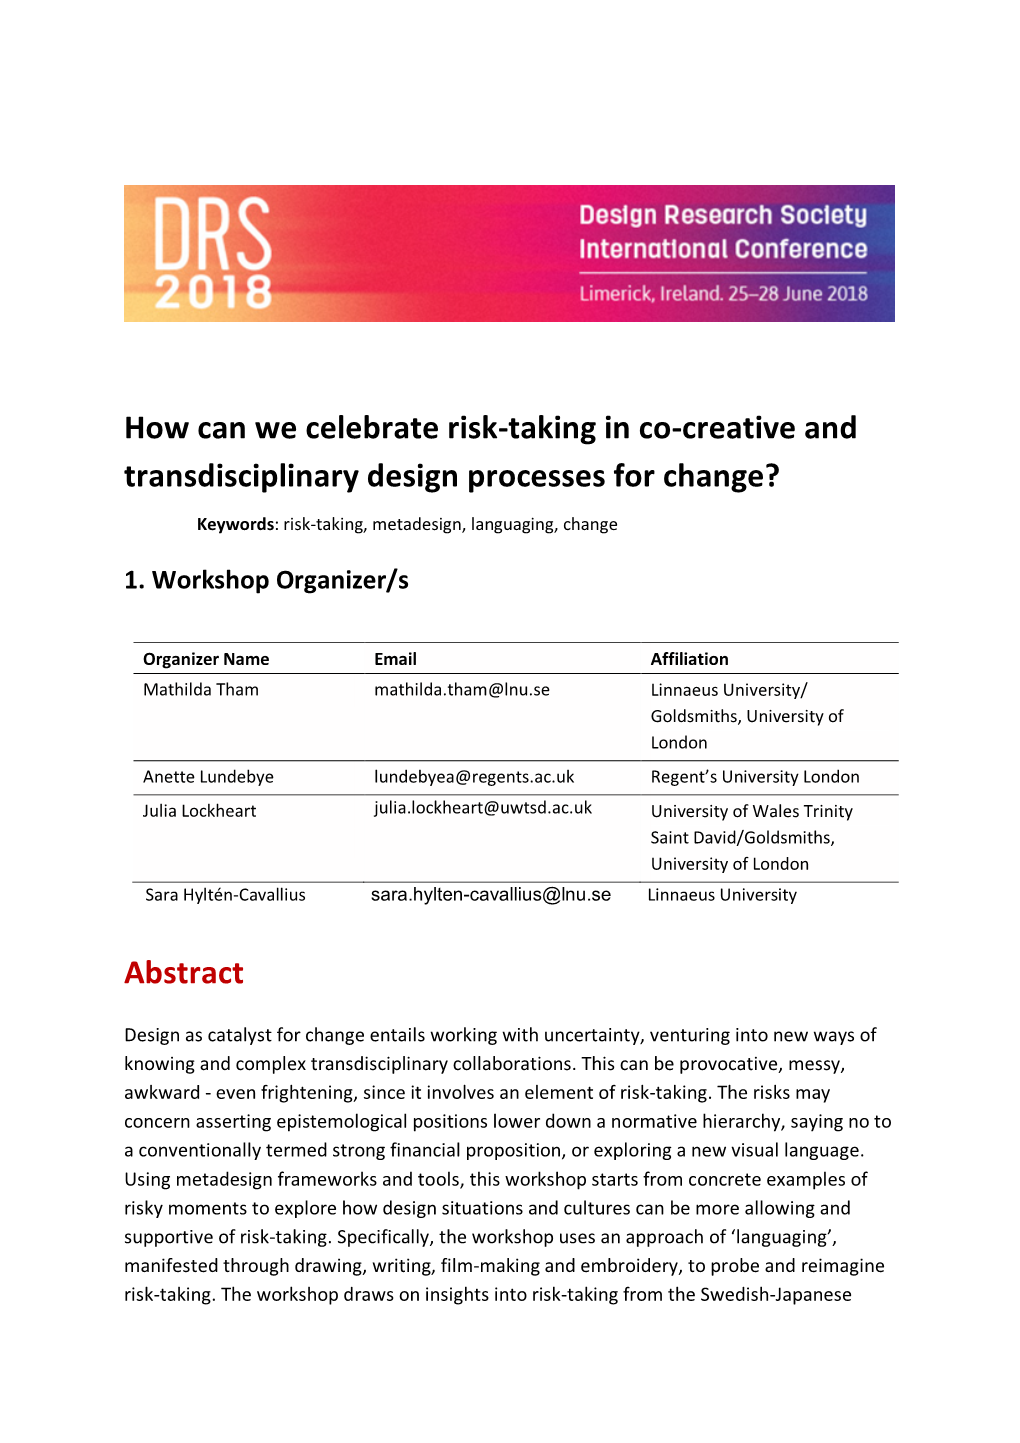 How Can We Celebrate Risk-Taking in Co-Creative and Transdisciplinary Design Processes for Change? Keywords: Risk-Taking, Metadesign, Languaging, Change